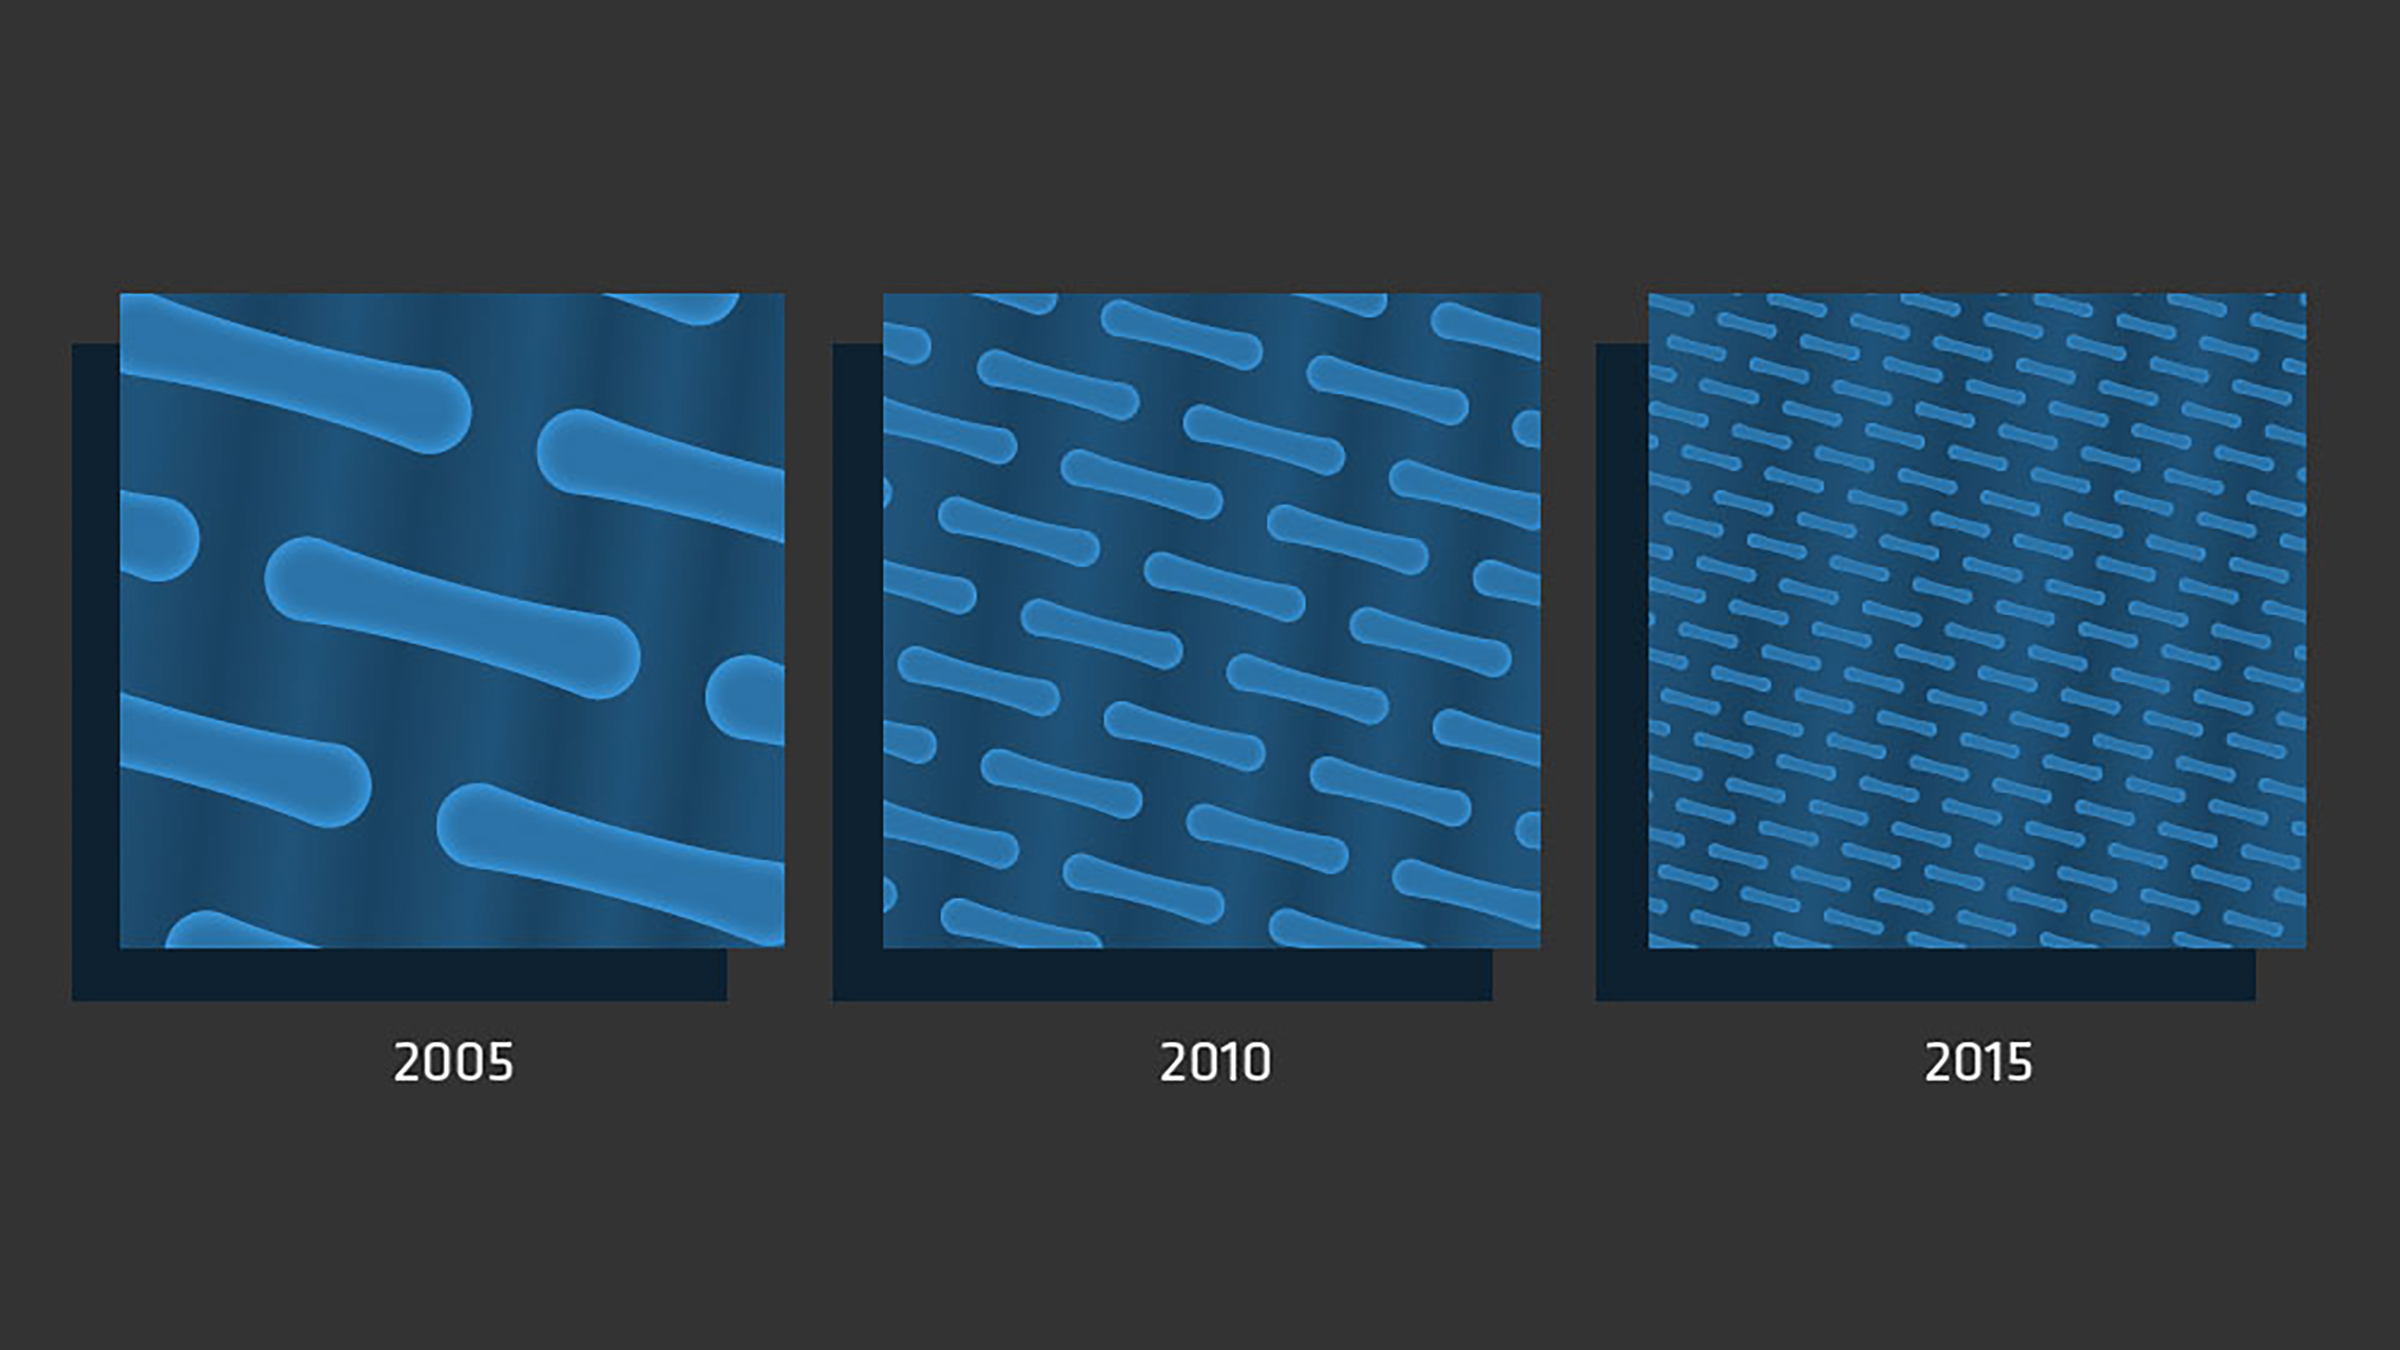 A comparison of microscopic structures on computer chips from 2005, 2010 and 2015 shows transistors shrinking and becoming closer together